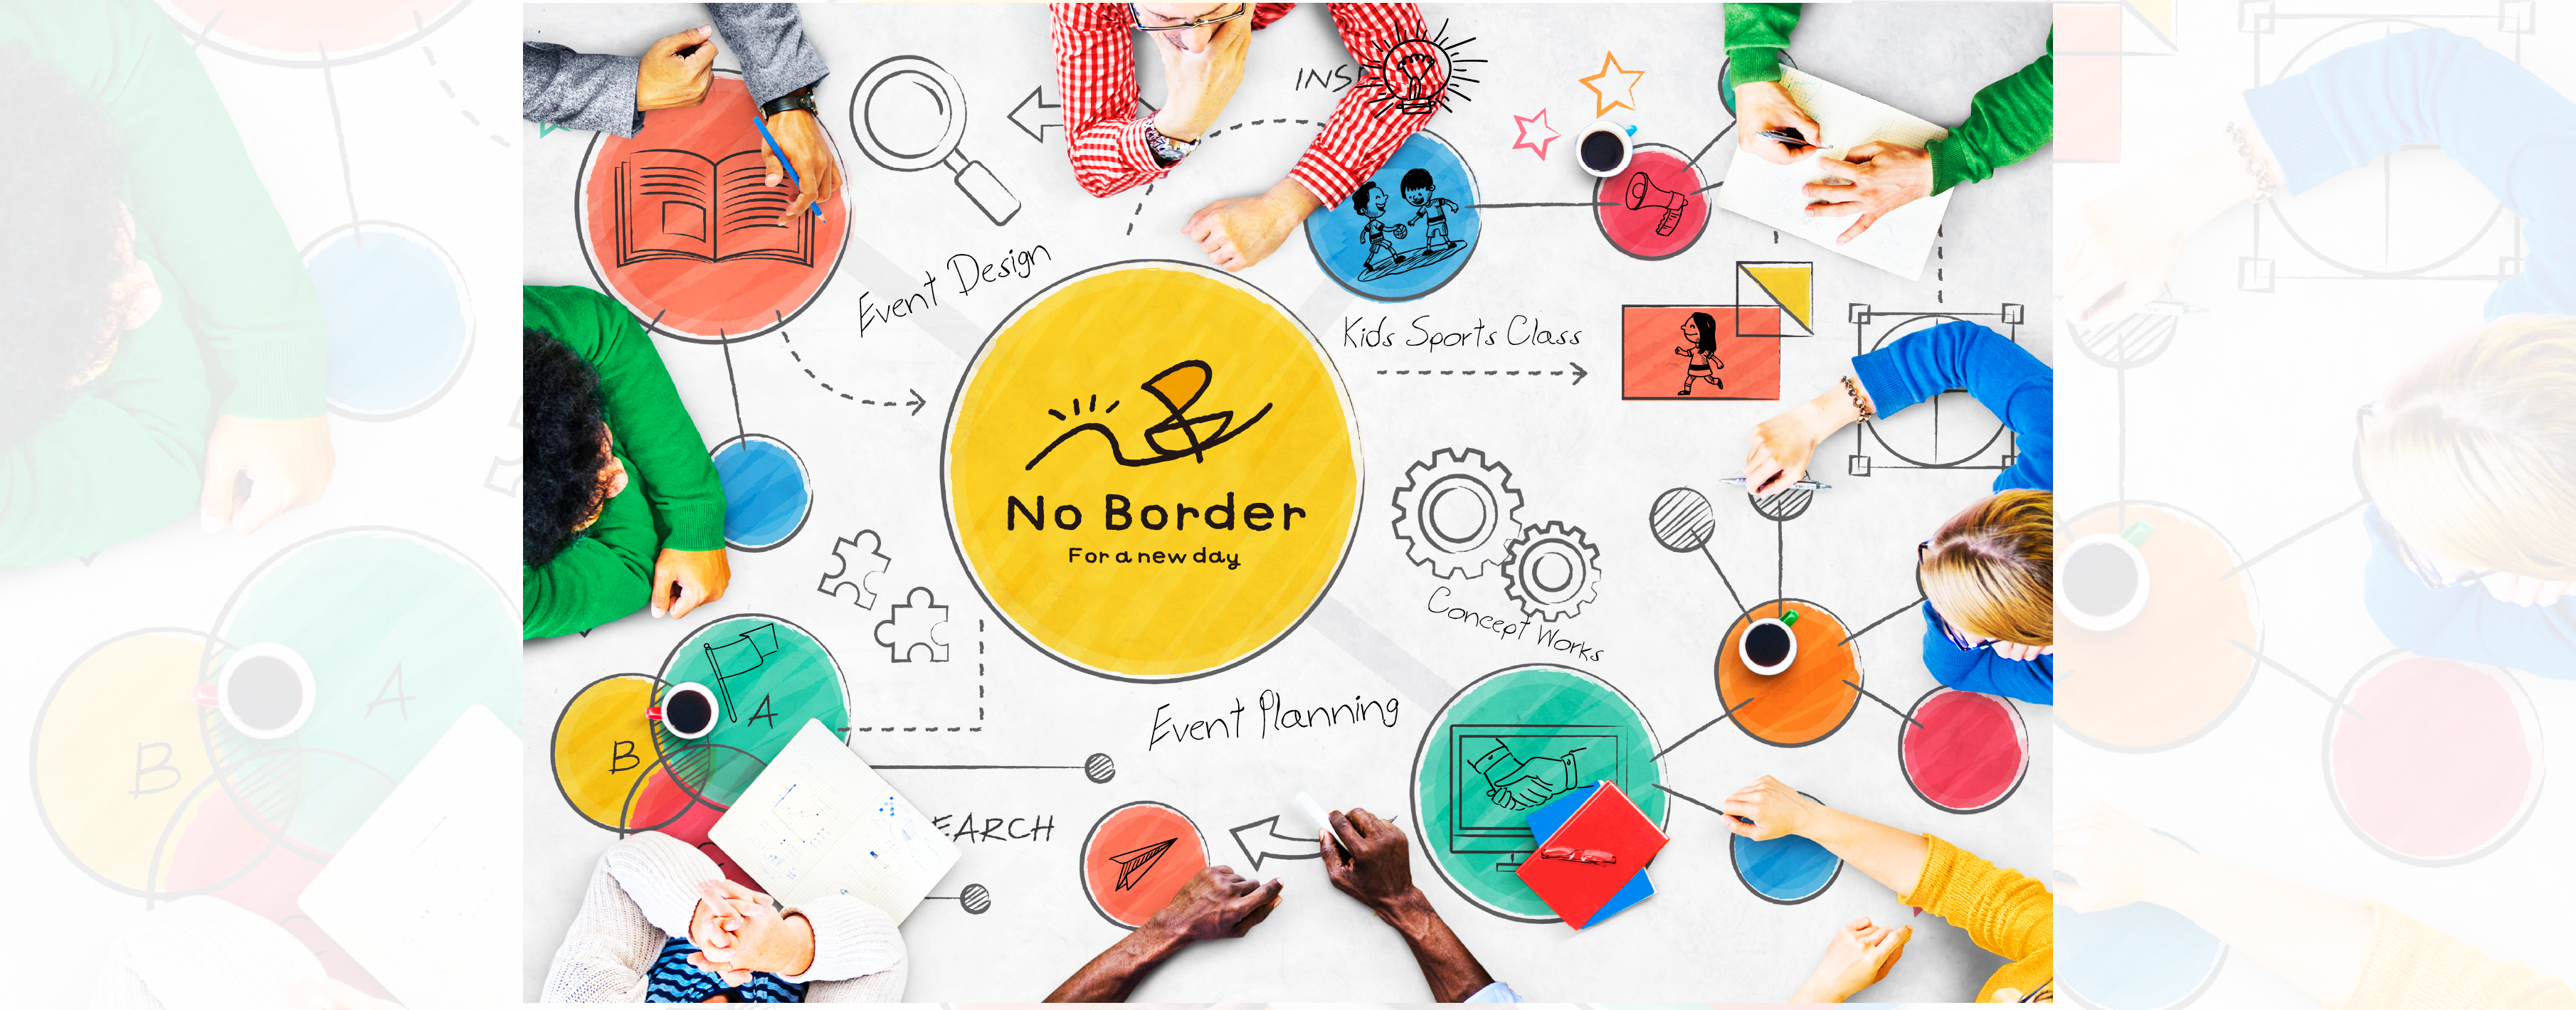 No Border for a new day